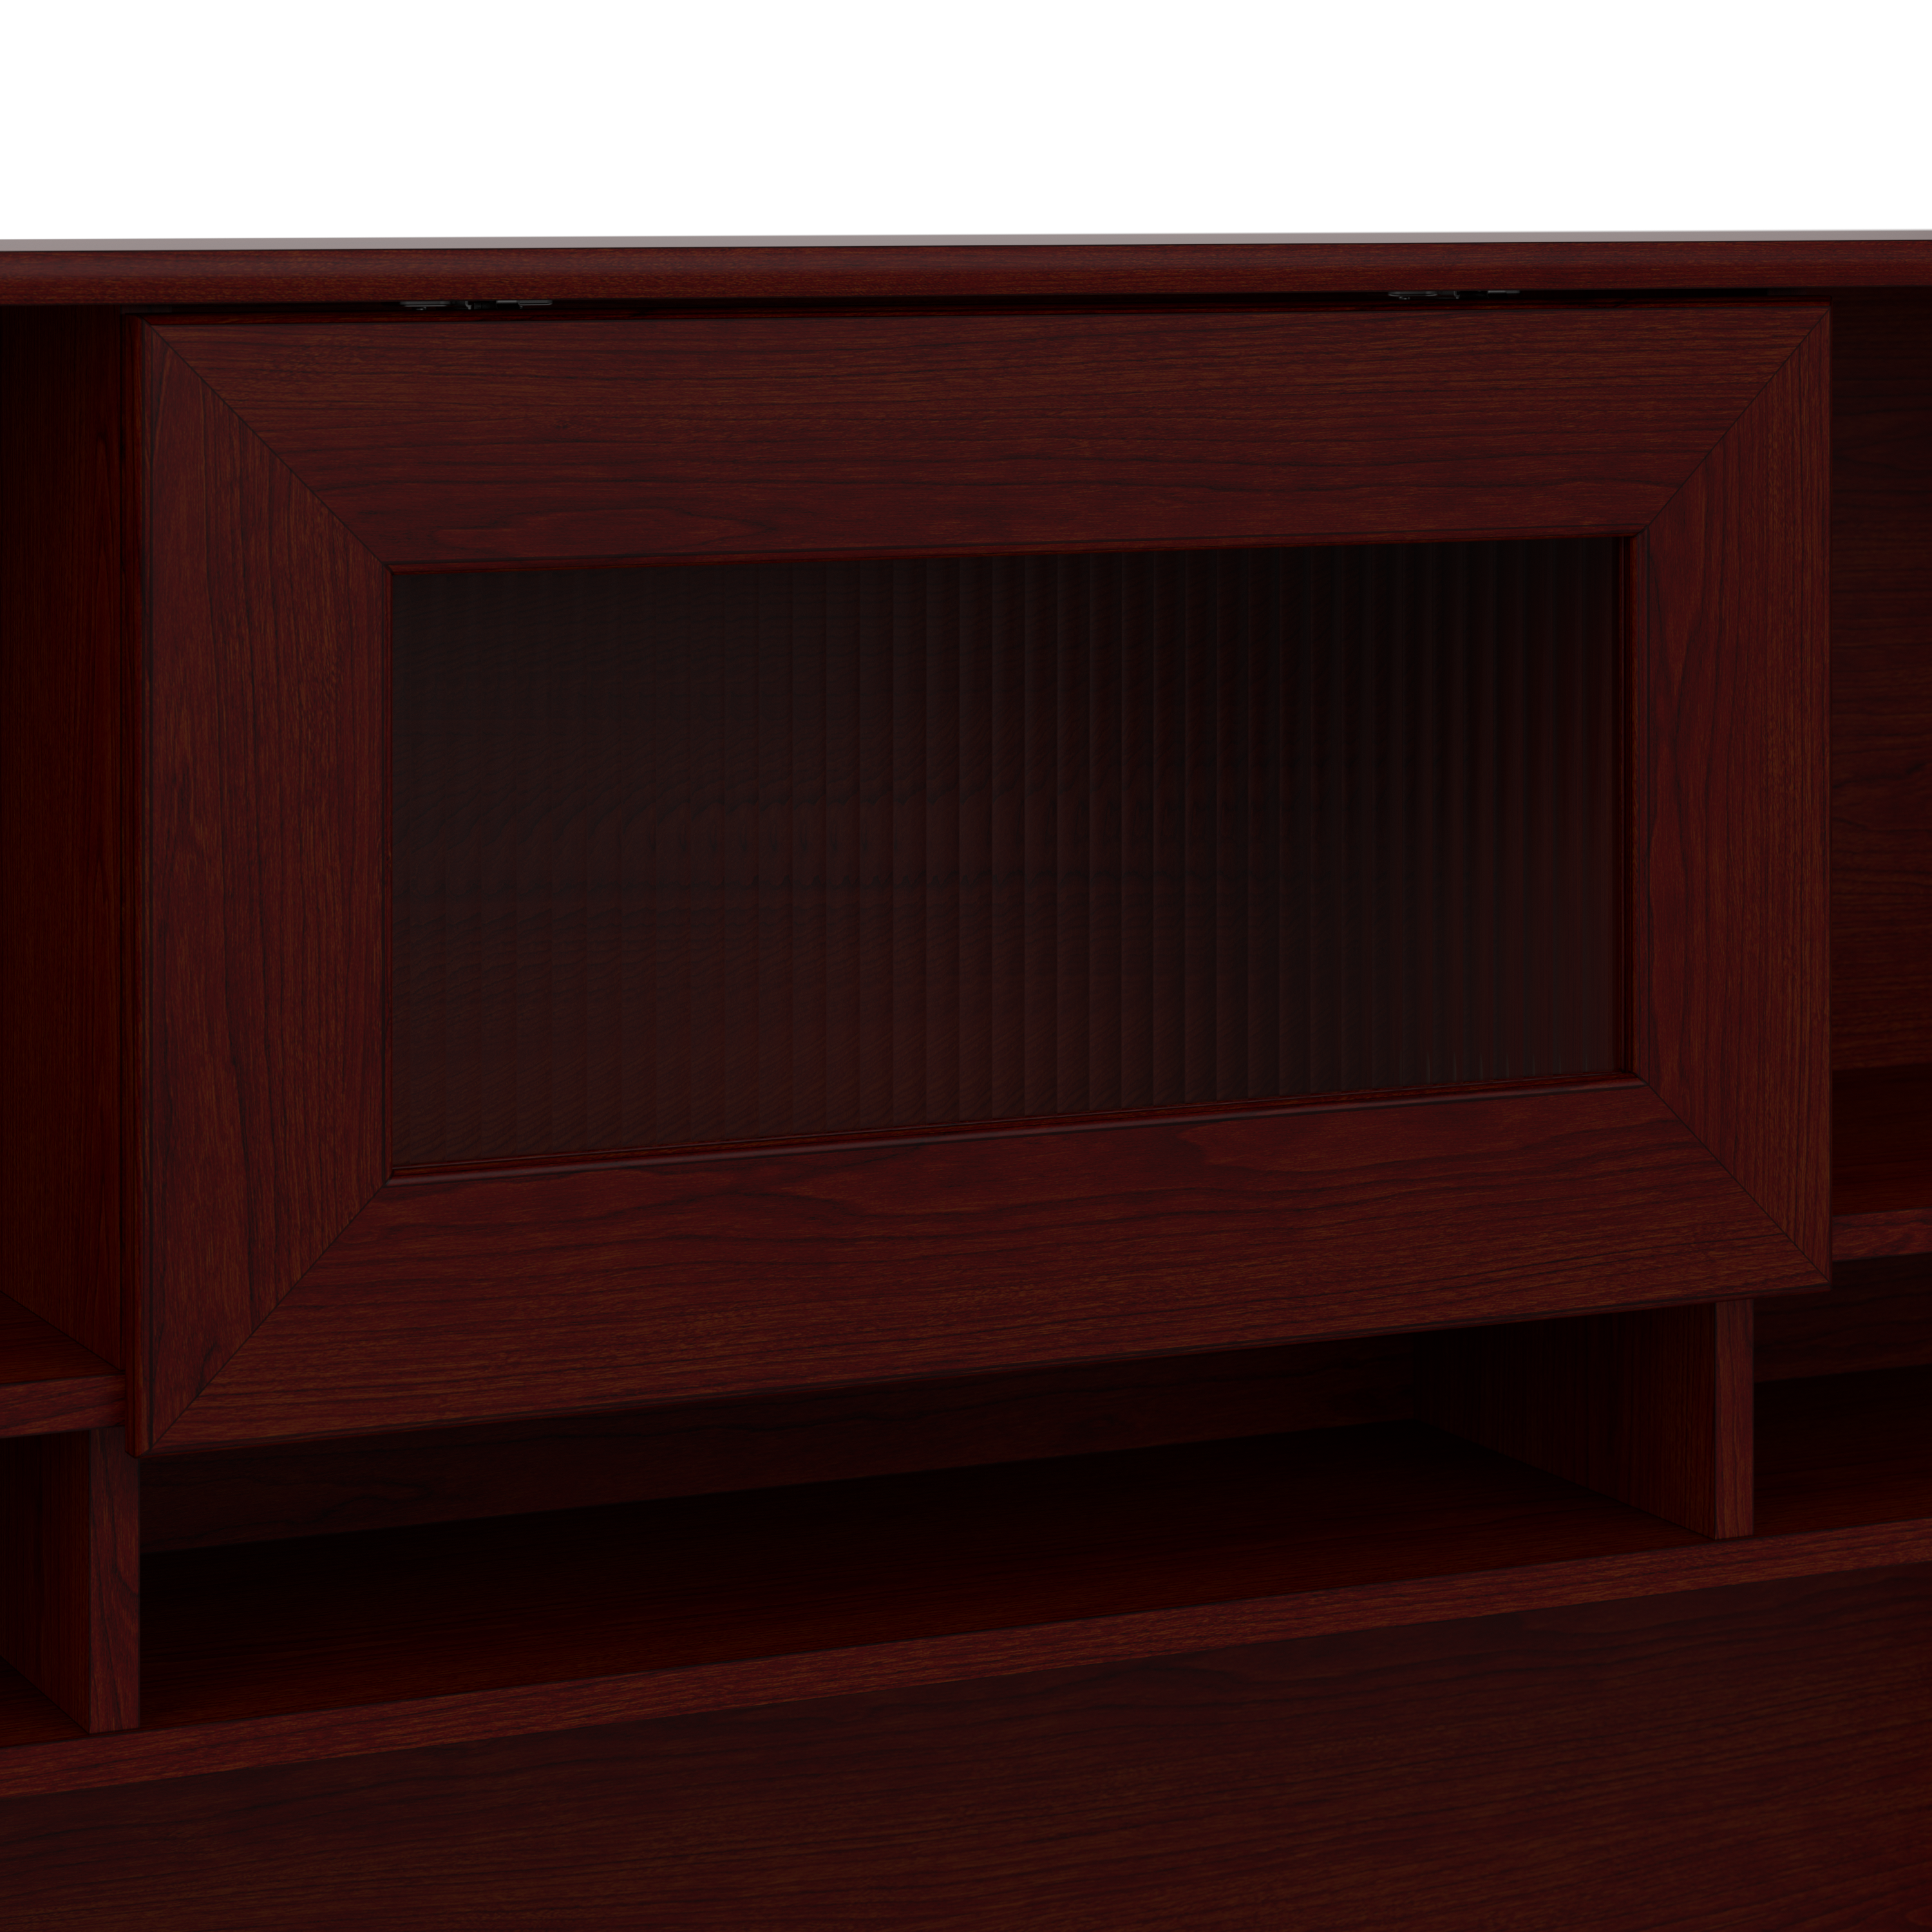 Shop Bush Furniture Cabot 60W L Shaped Computer Desk with Hutch and Drawers 04 CAB046HVC #color_harvest cherry